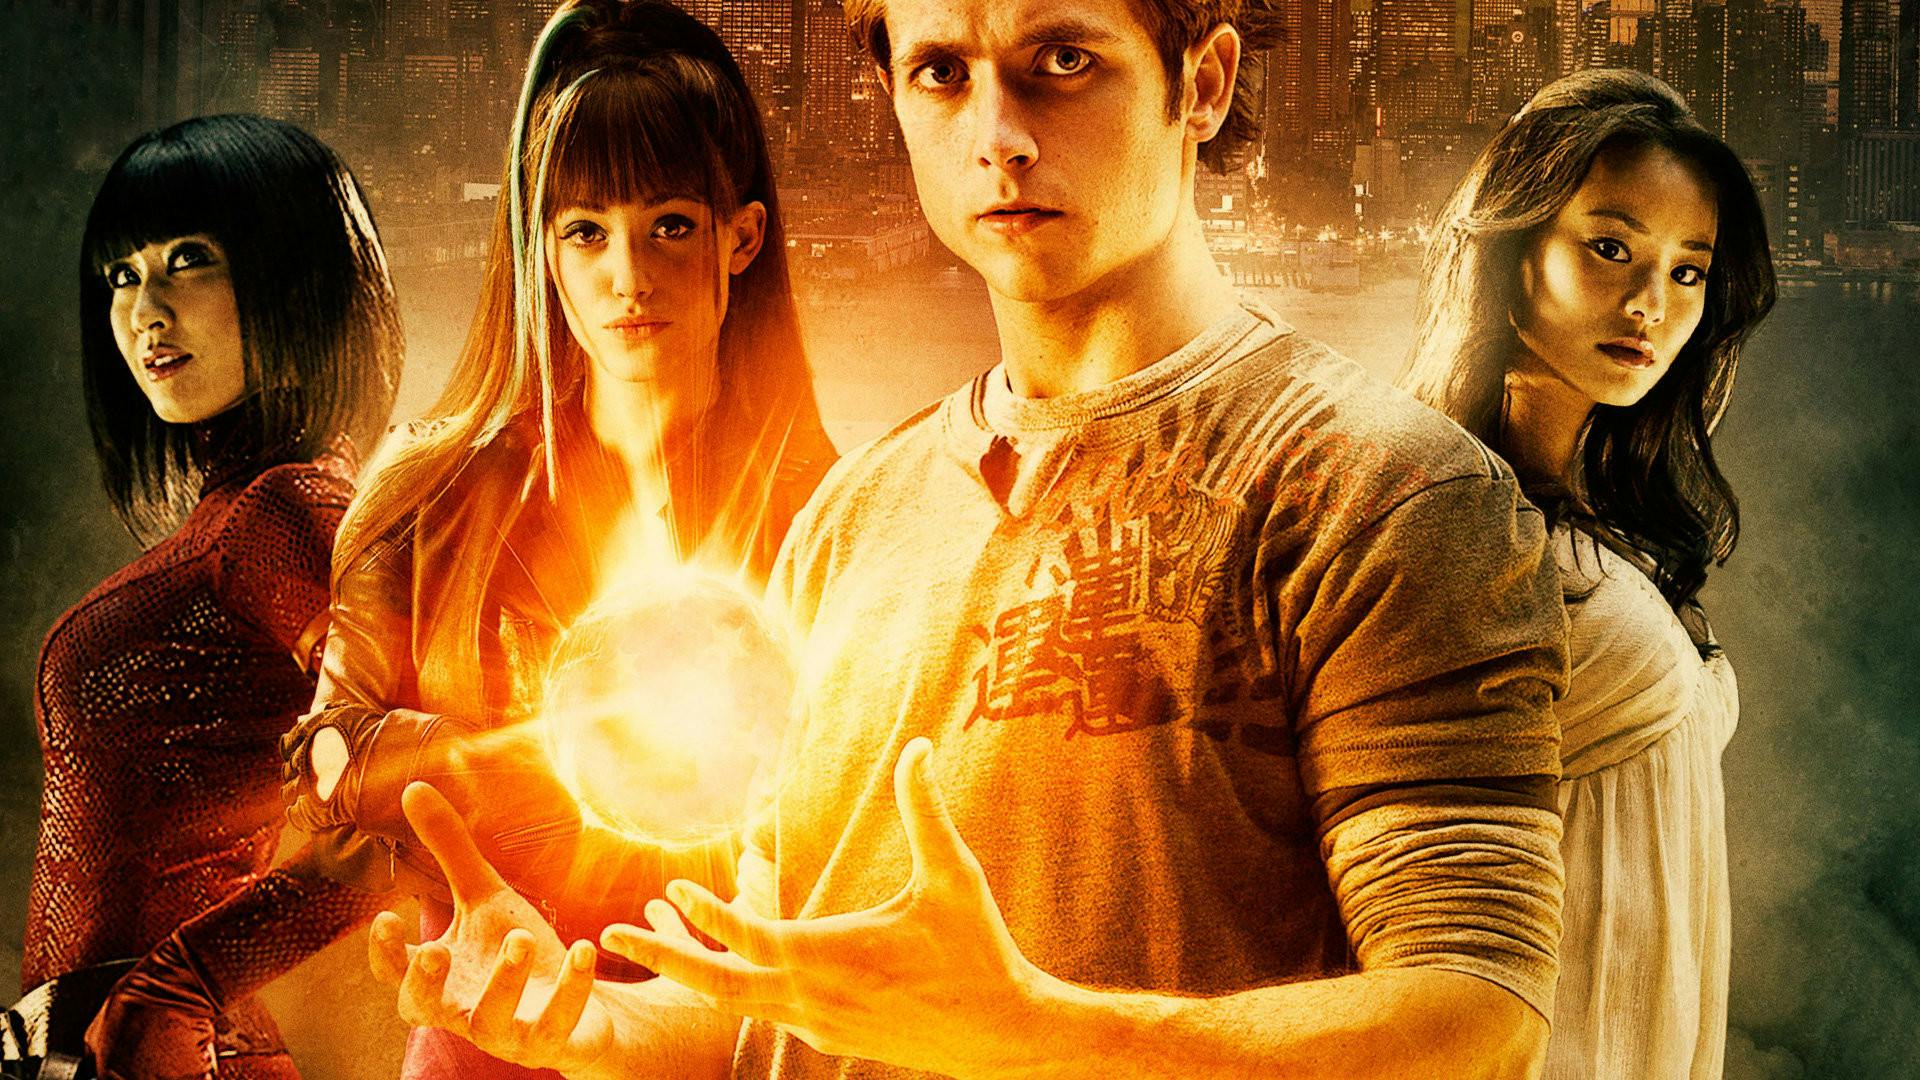 Dragonball Evolution - Wallpaper with Justin Chatwin & Emmy Rossum